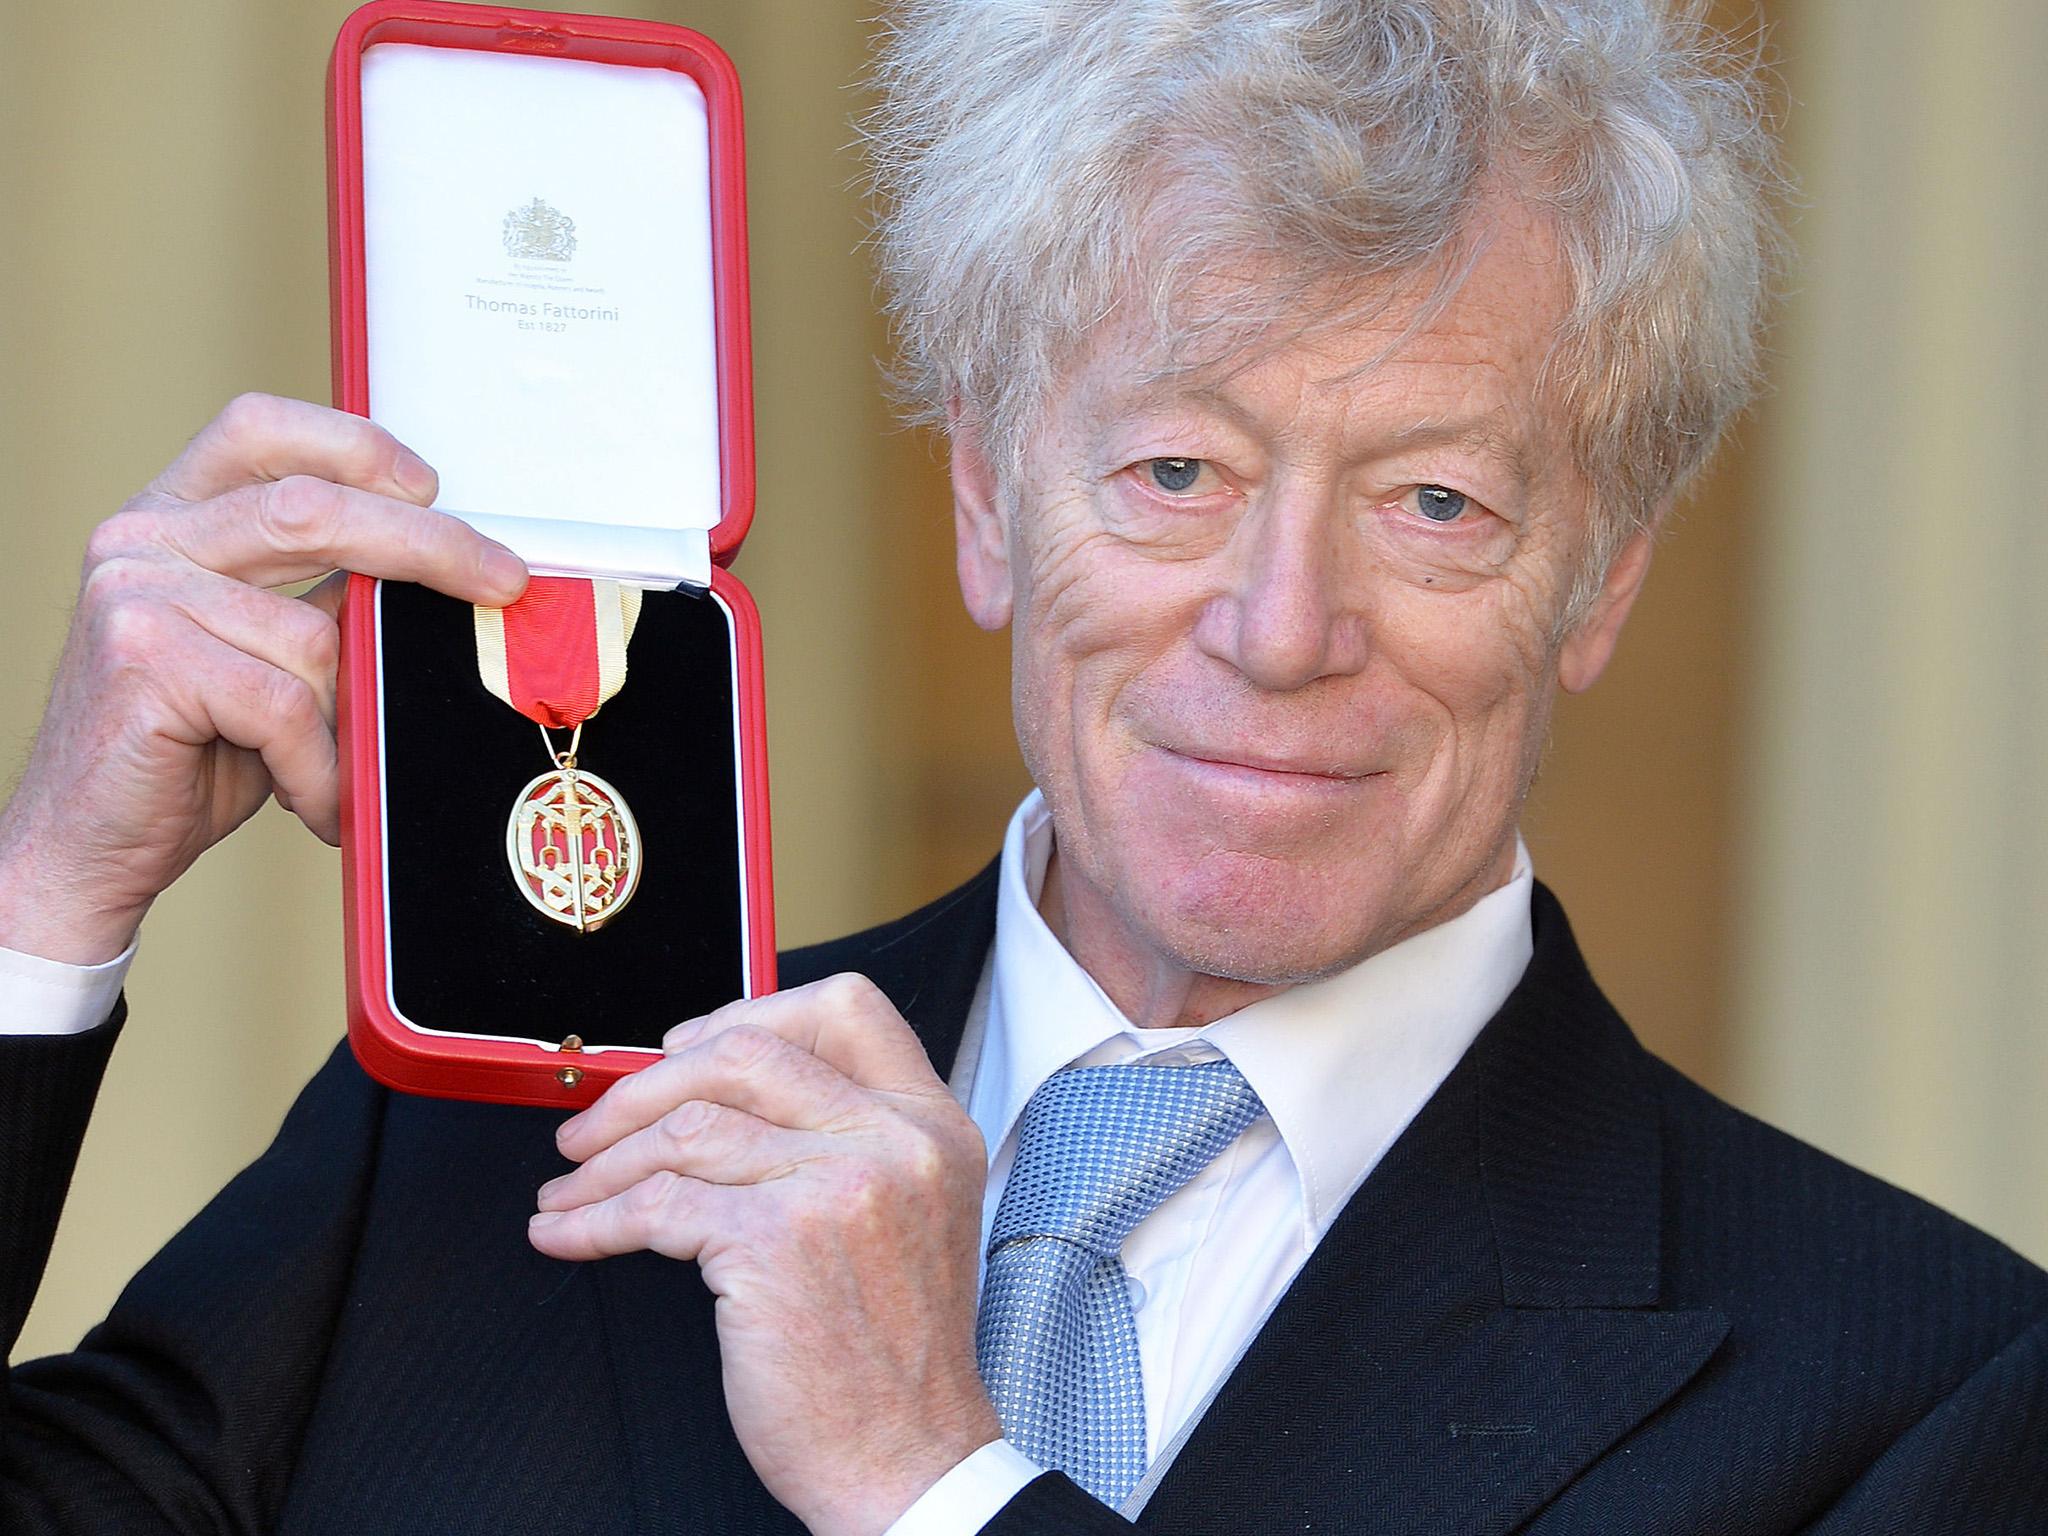 Sir Roger Scruton claimed Islamophobia was ‘invented by the Muslim Brotherhood in order to stop discussion of a major issue’